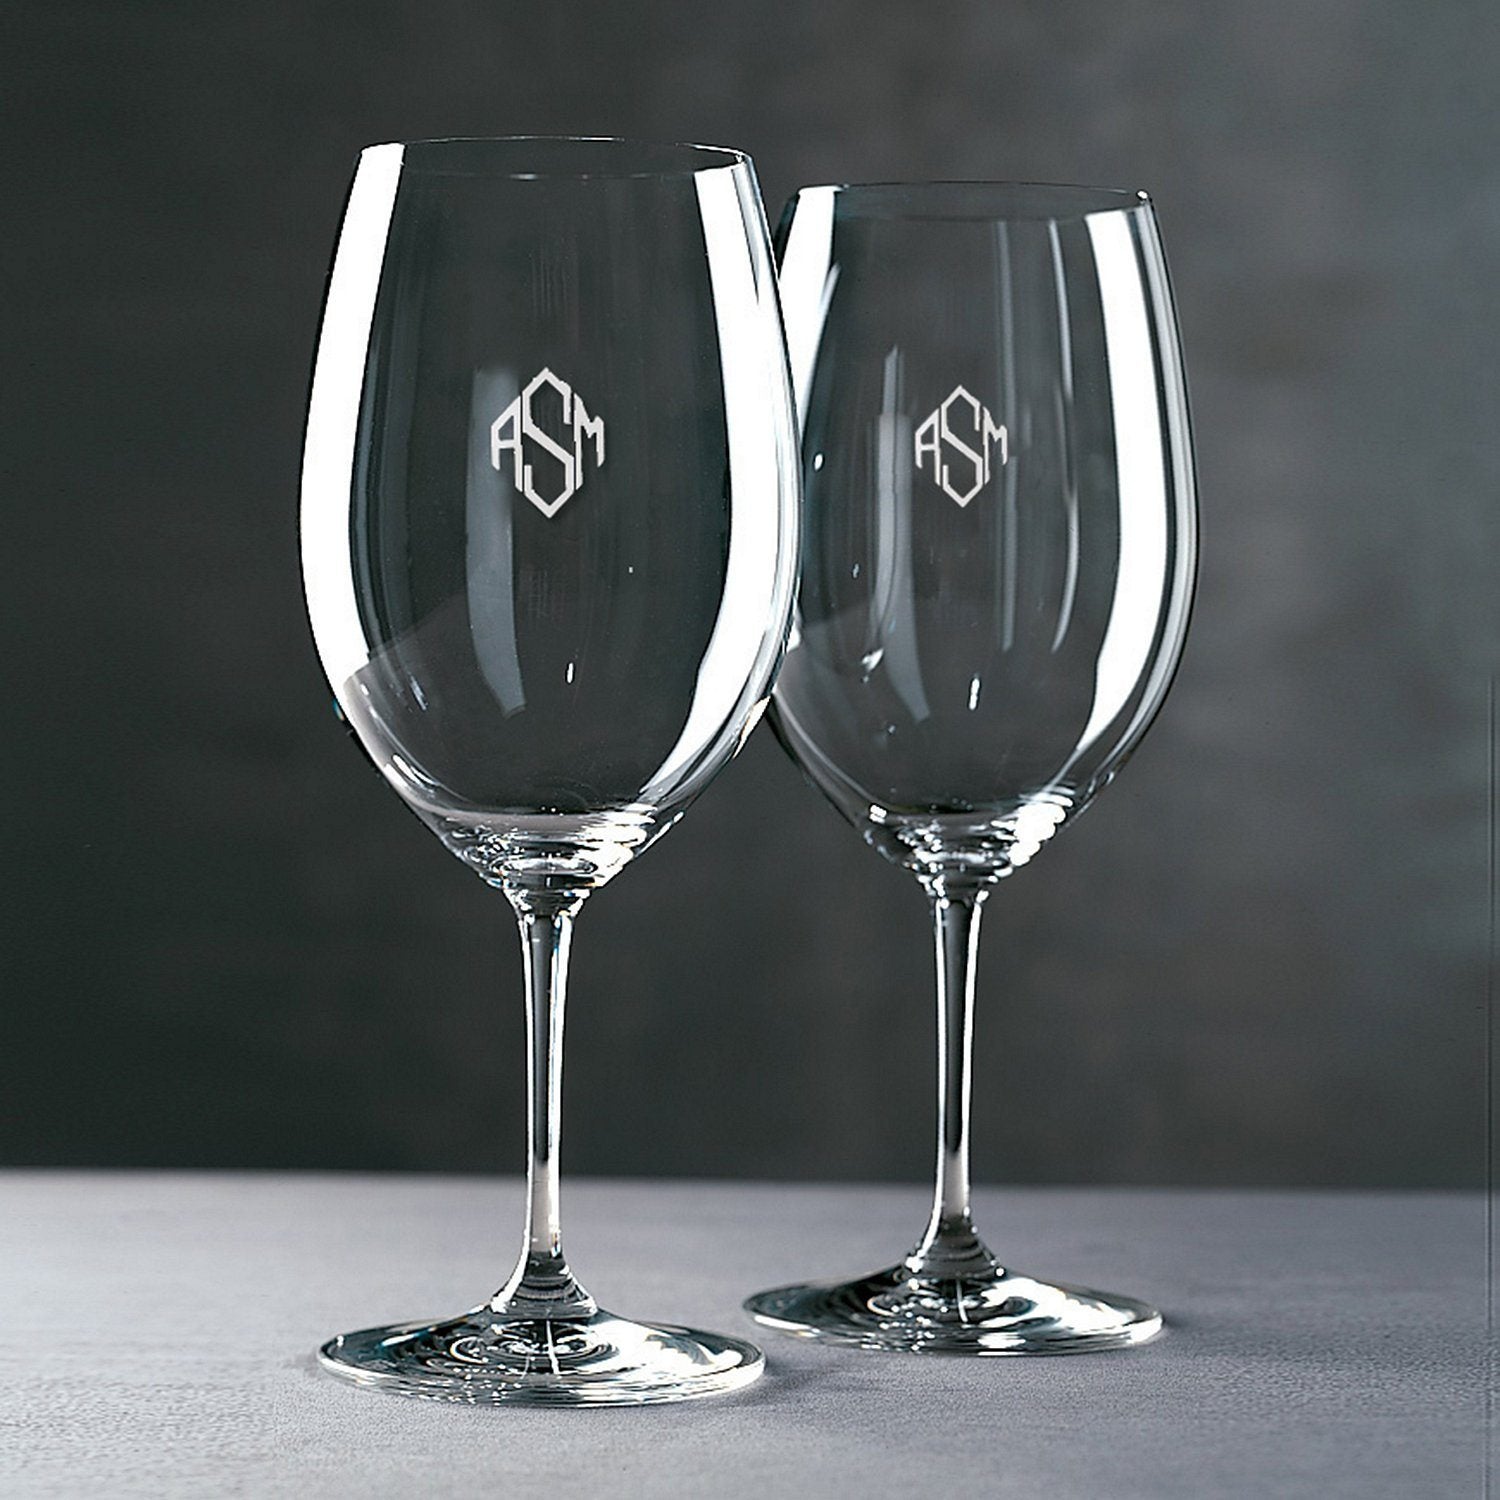 Personalised Glasses - Riedel Crystal Wine Glasses With Engraving